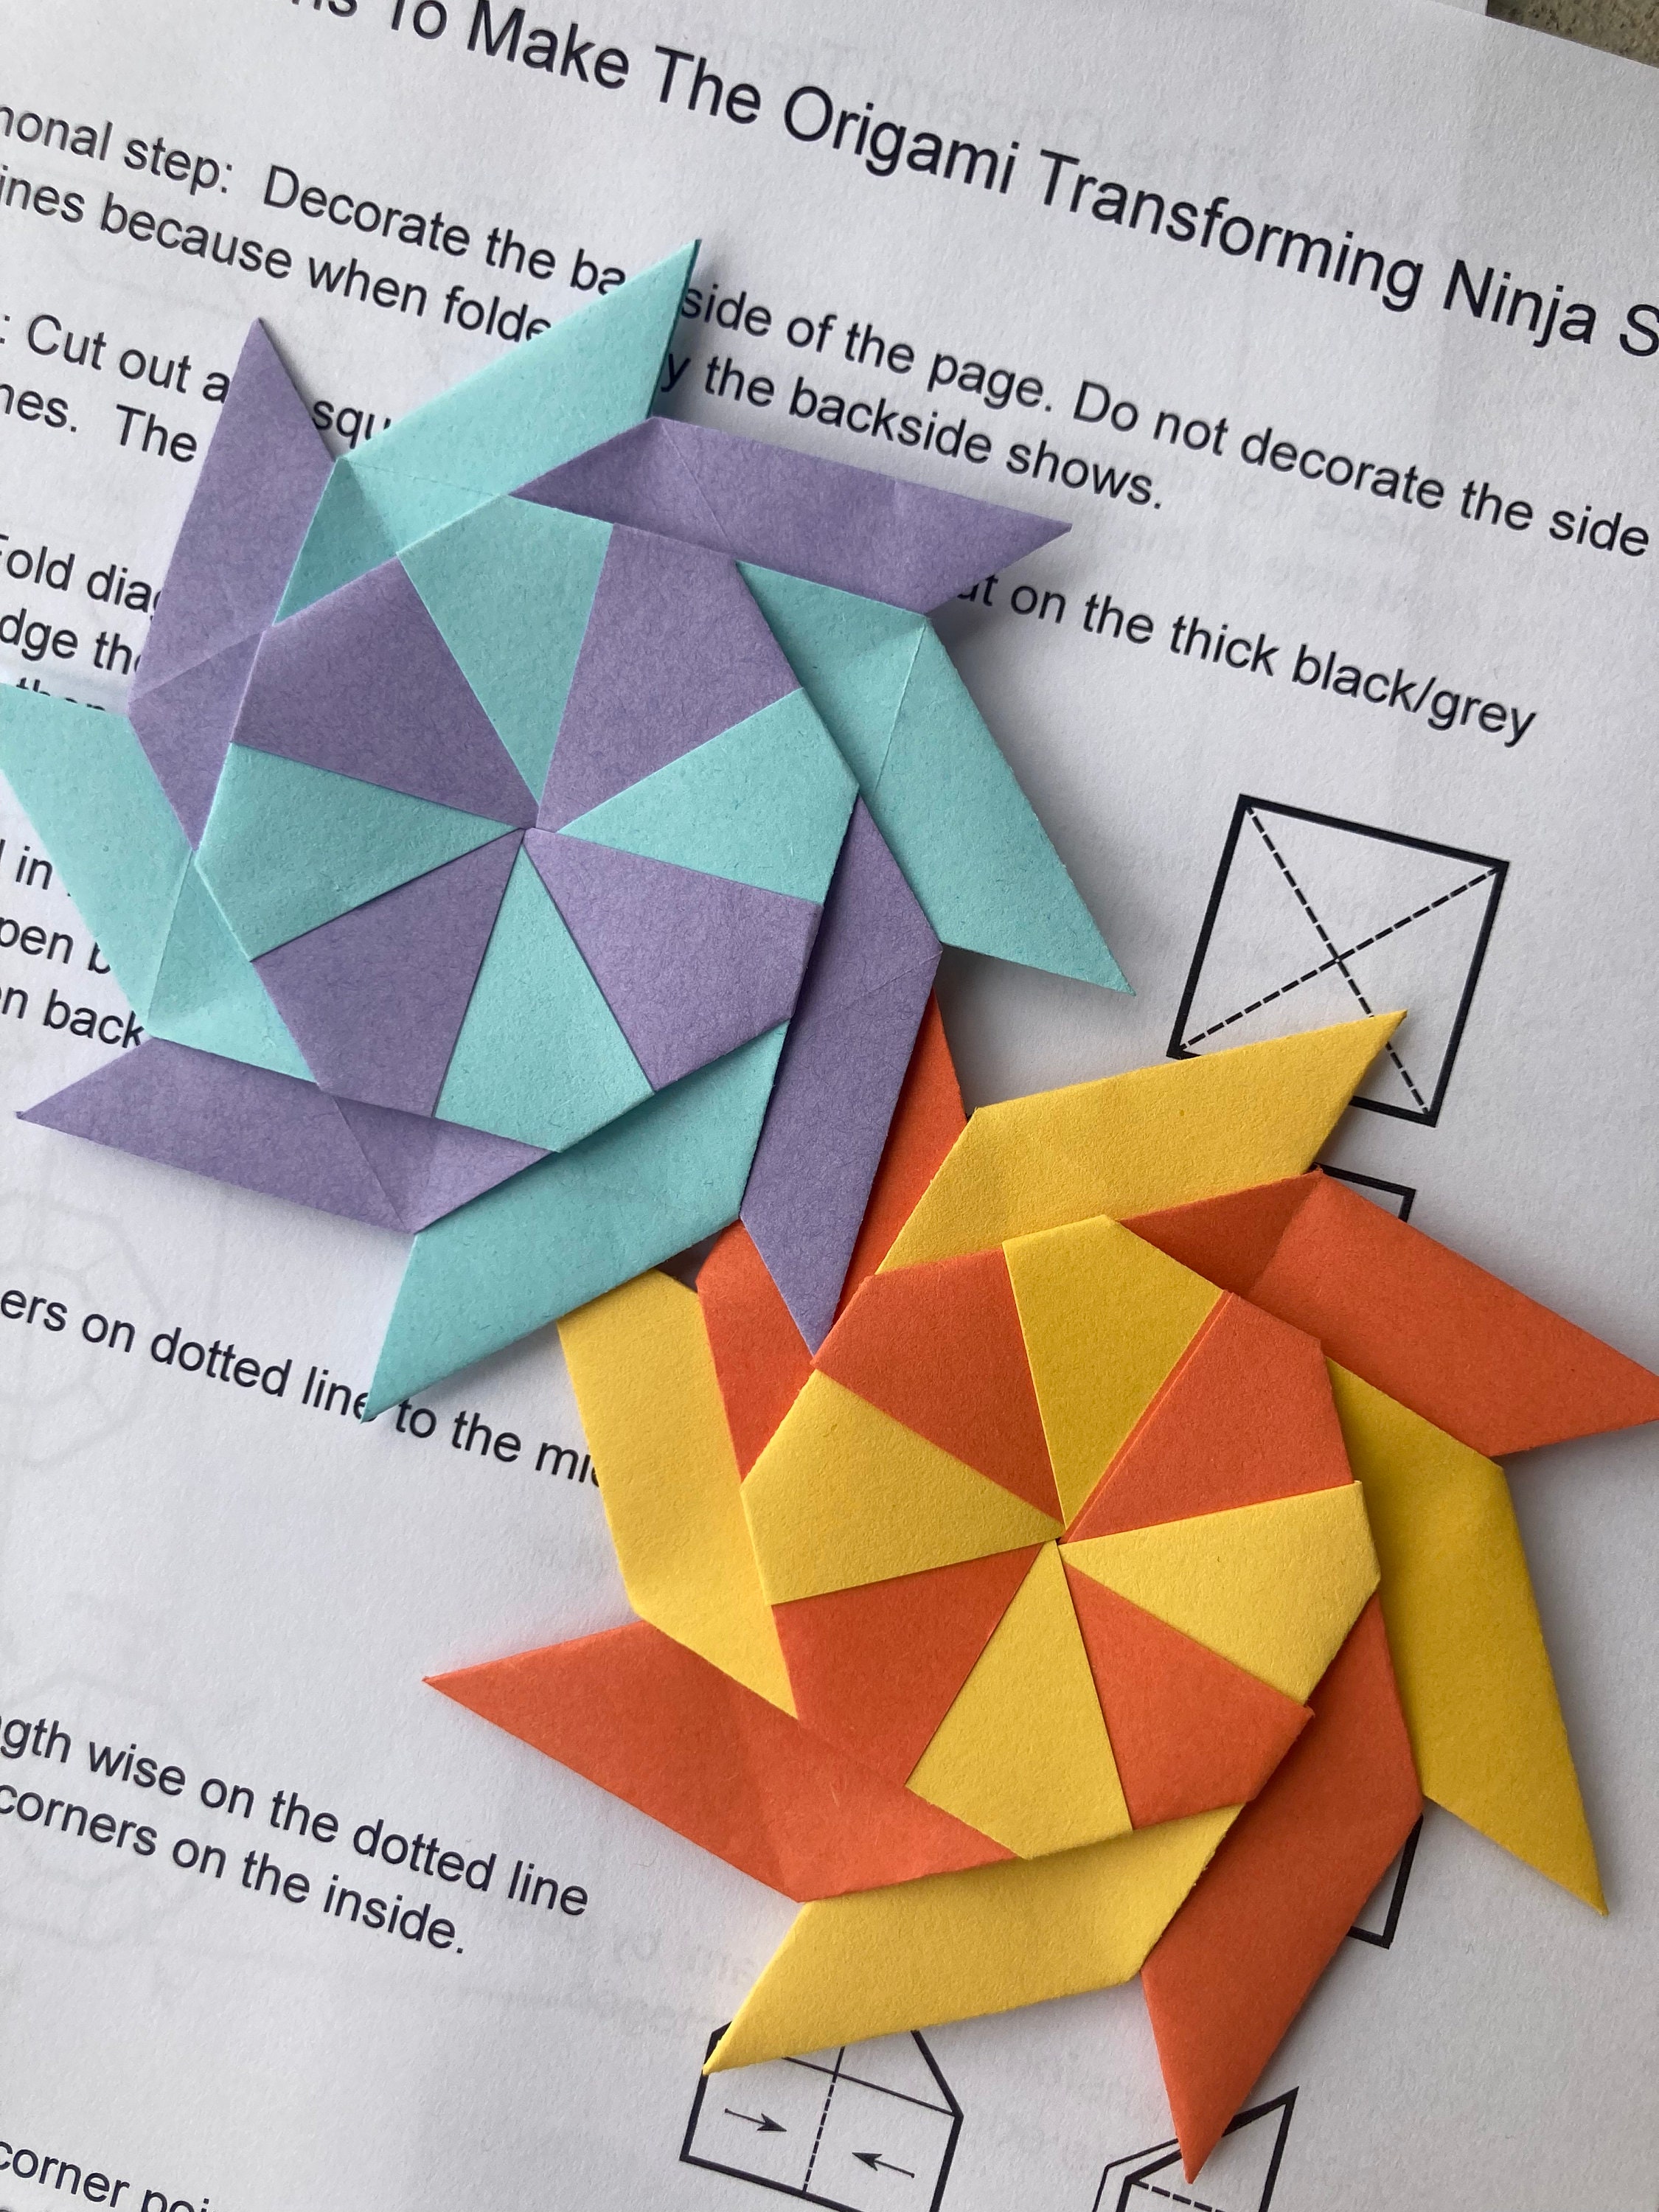 It's so much fun to make folded ninja stars from origami paper